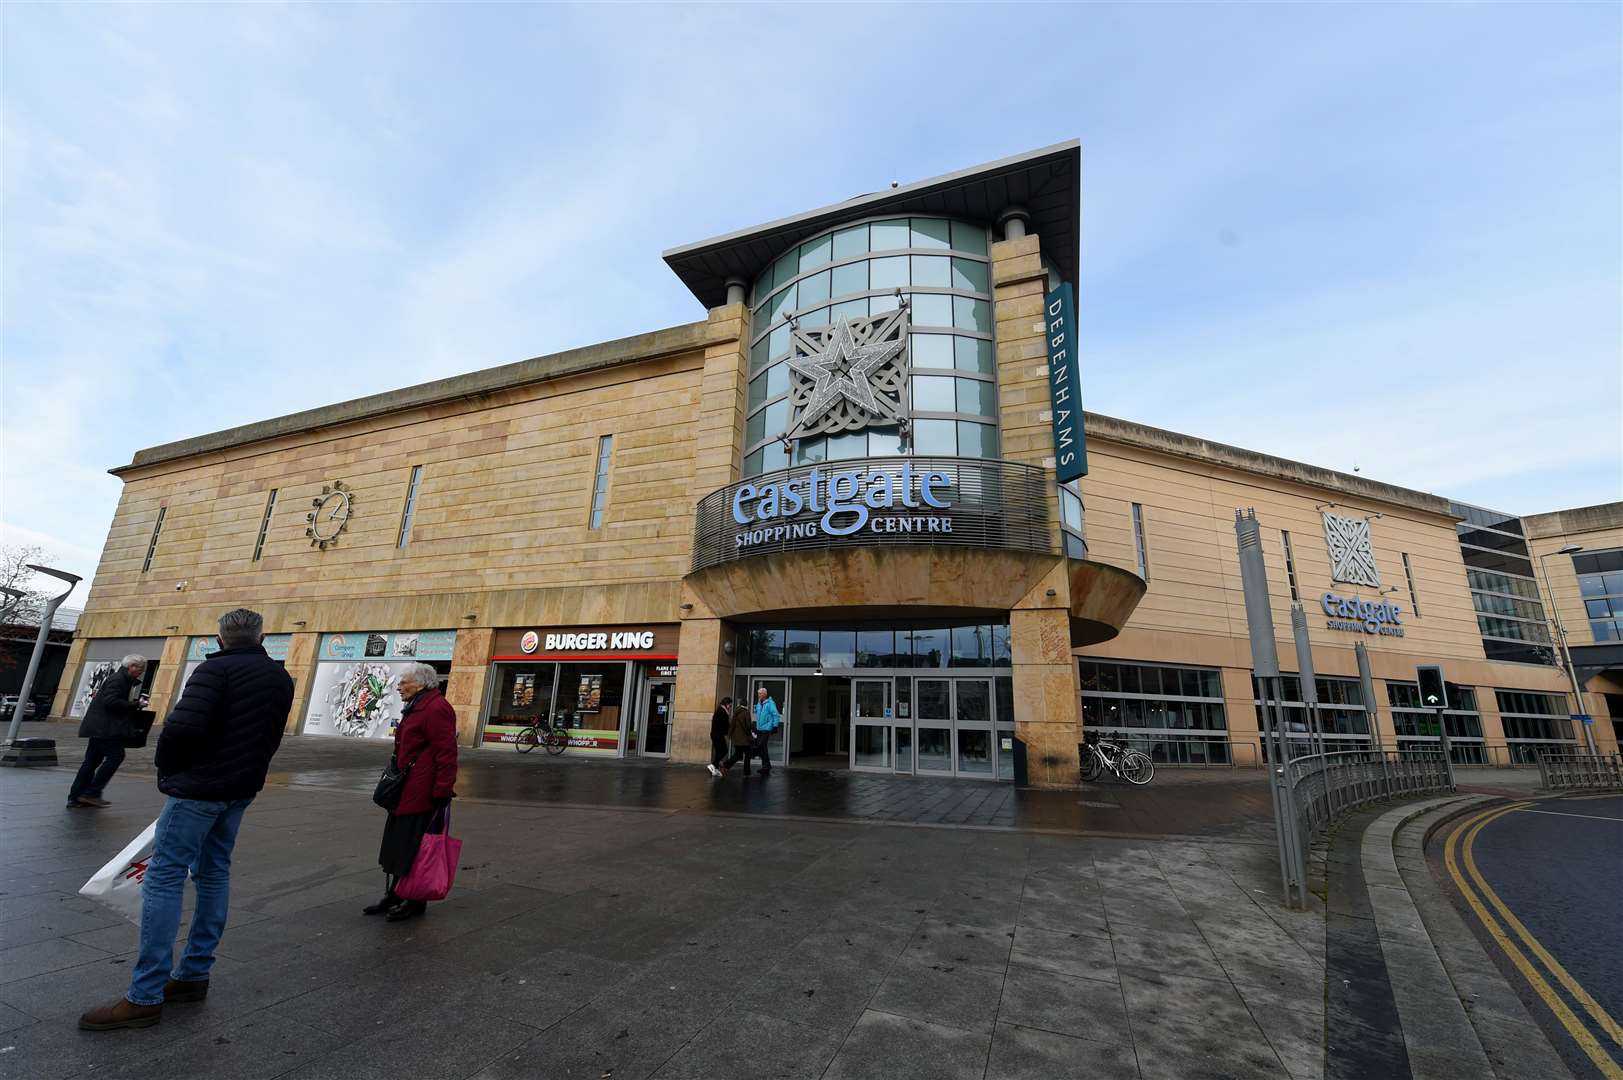 The Eastgate Shopping Centre in Inverness has won two prizes in the Loo of the Year Awards.